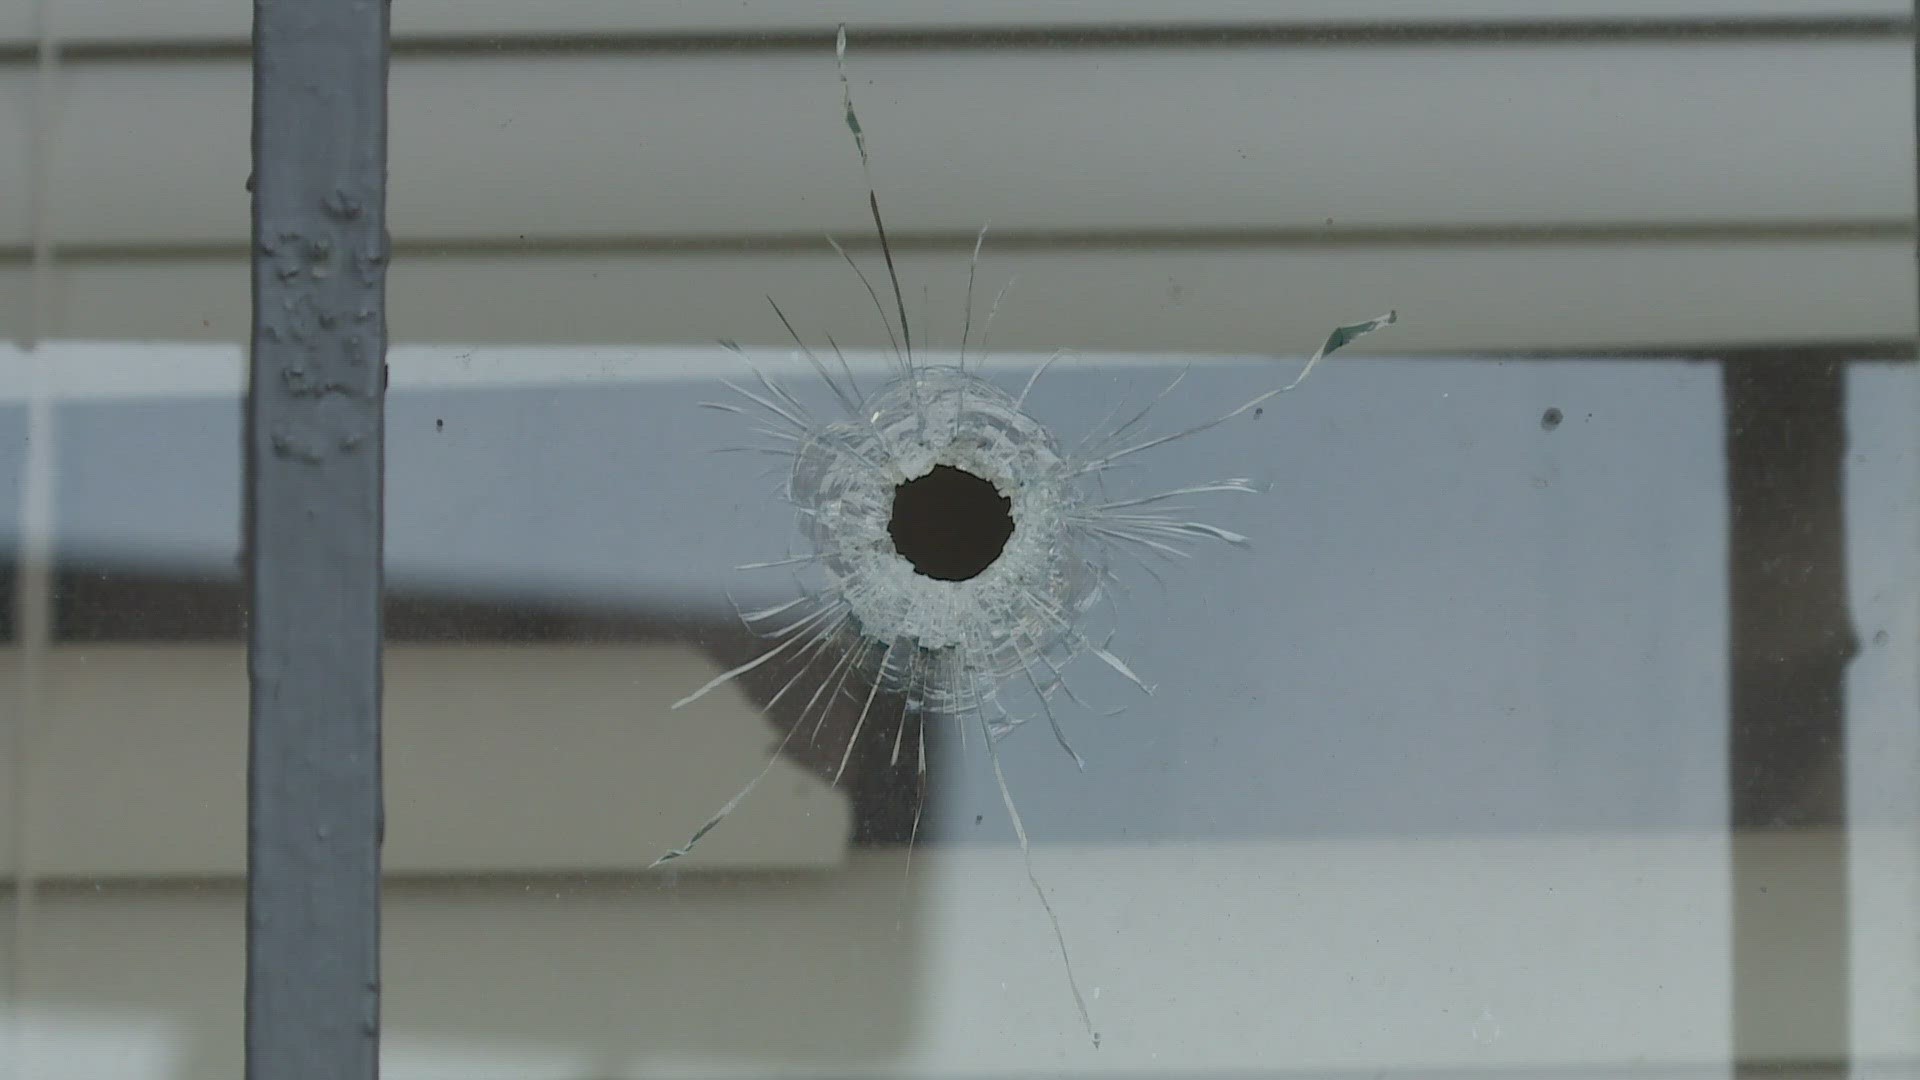 Homeowners described the moment dozens of bullets were fired into their home during the early hours of the morning.